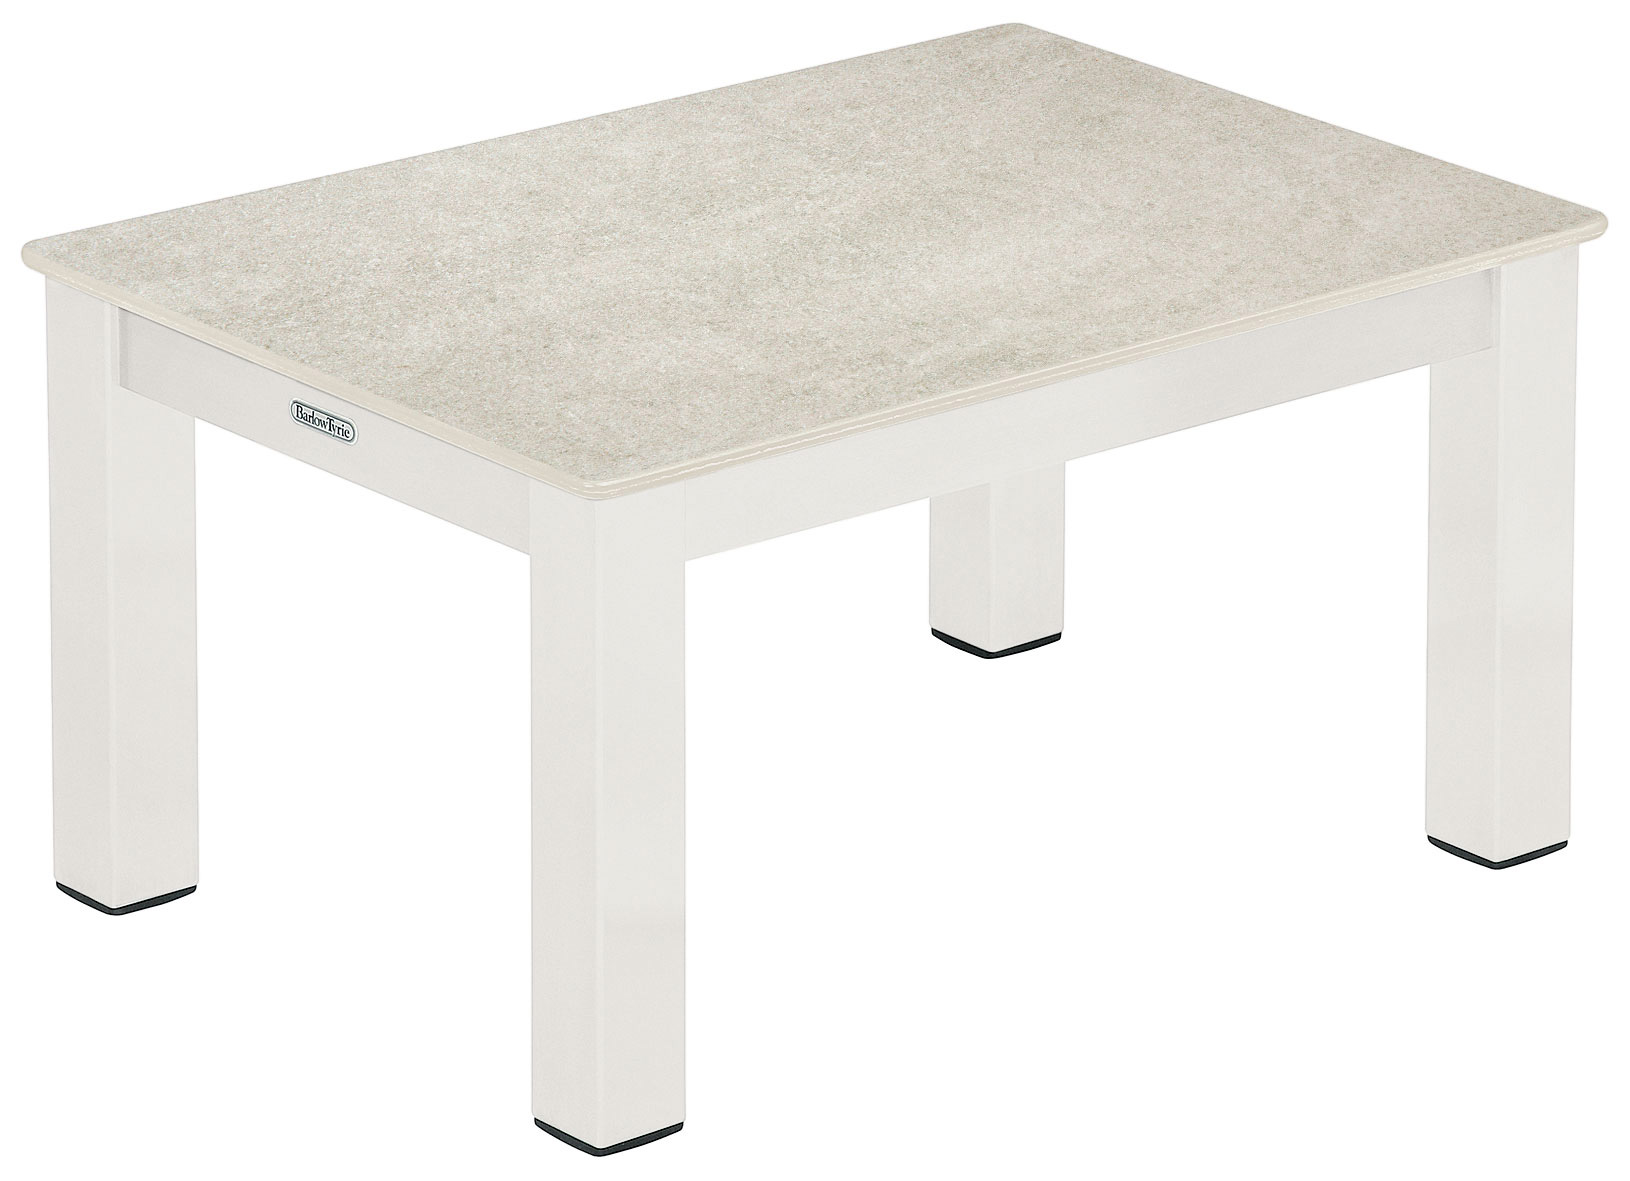 EQUINOX Low Lounger Table